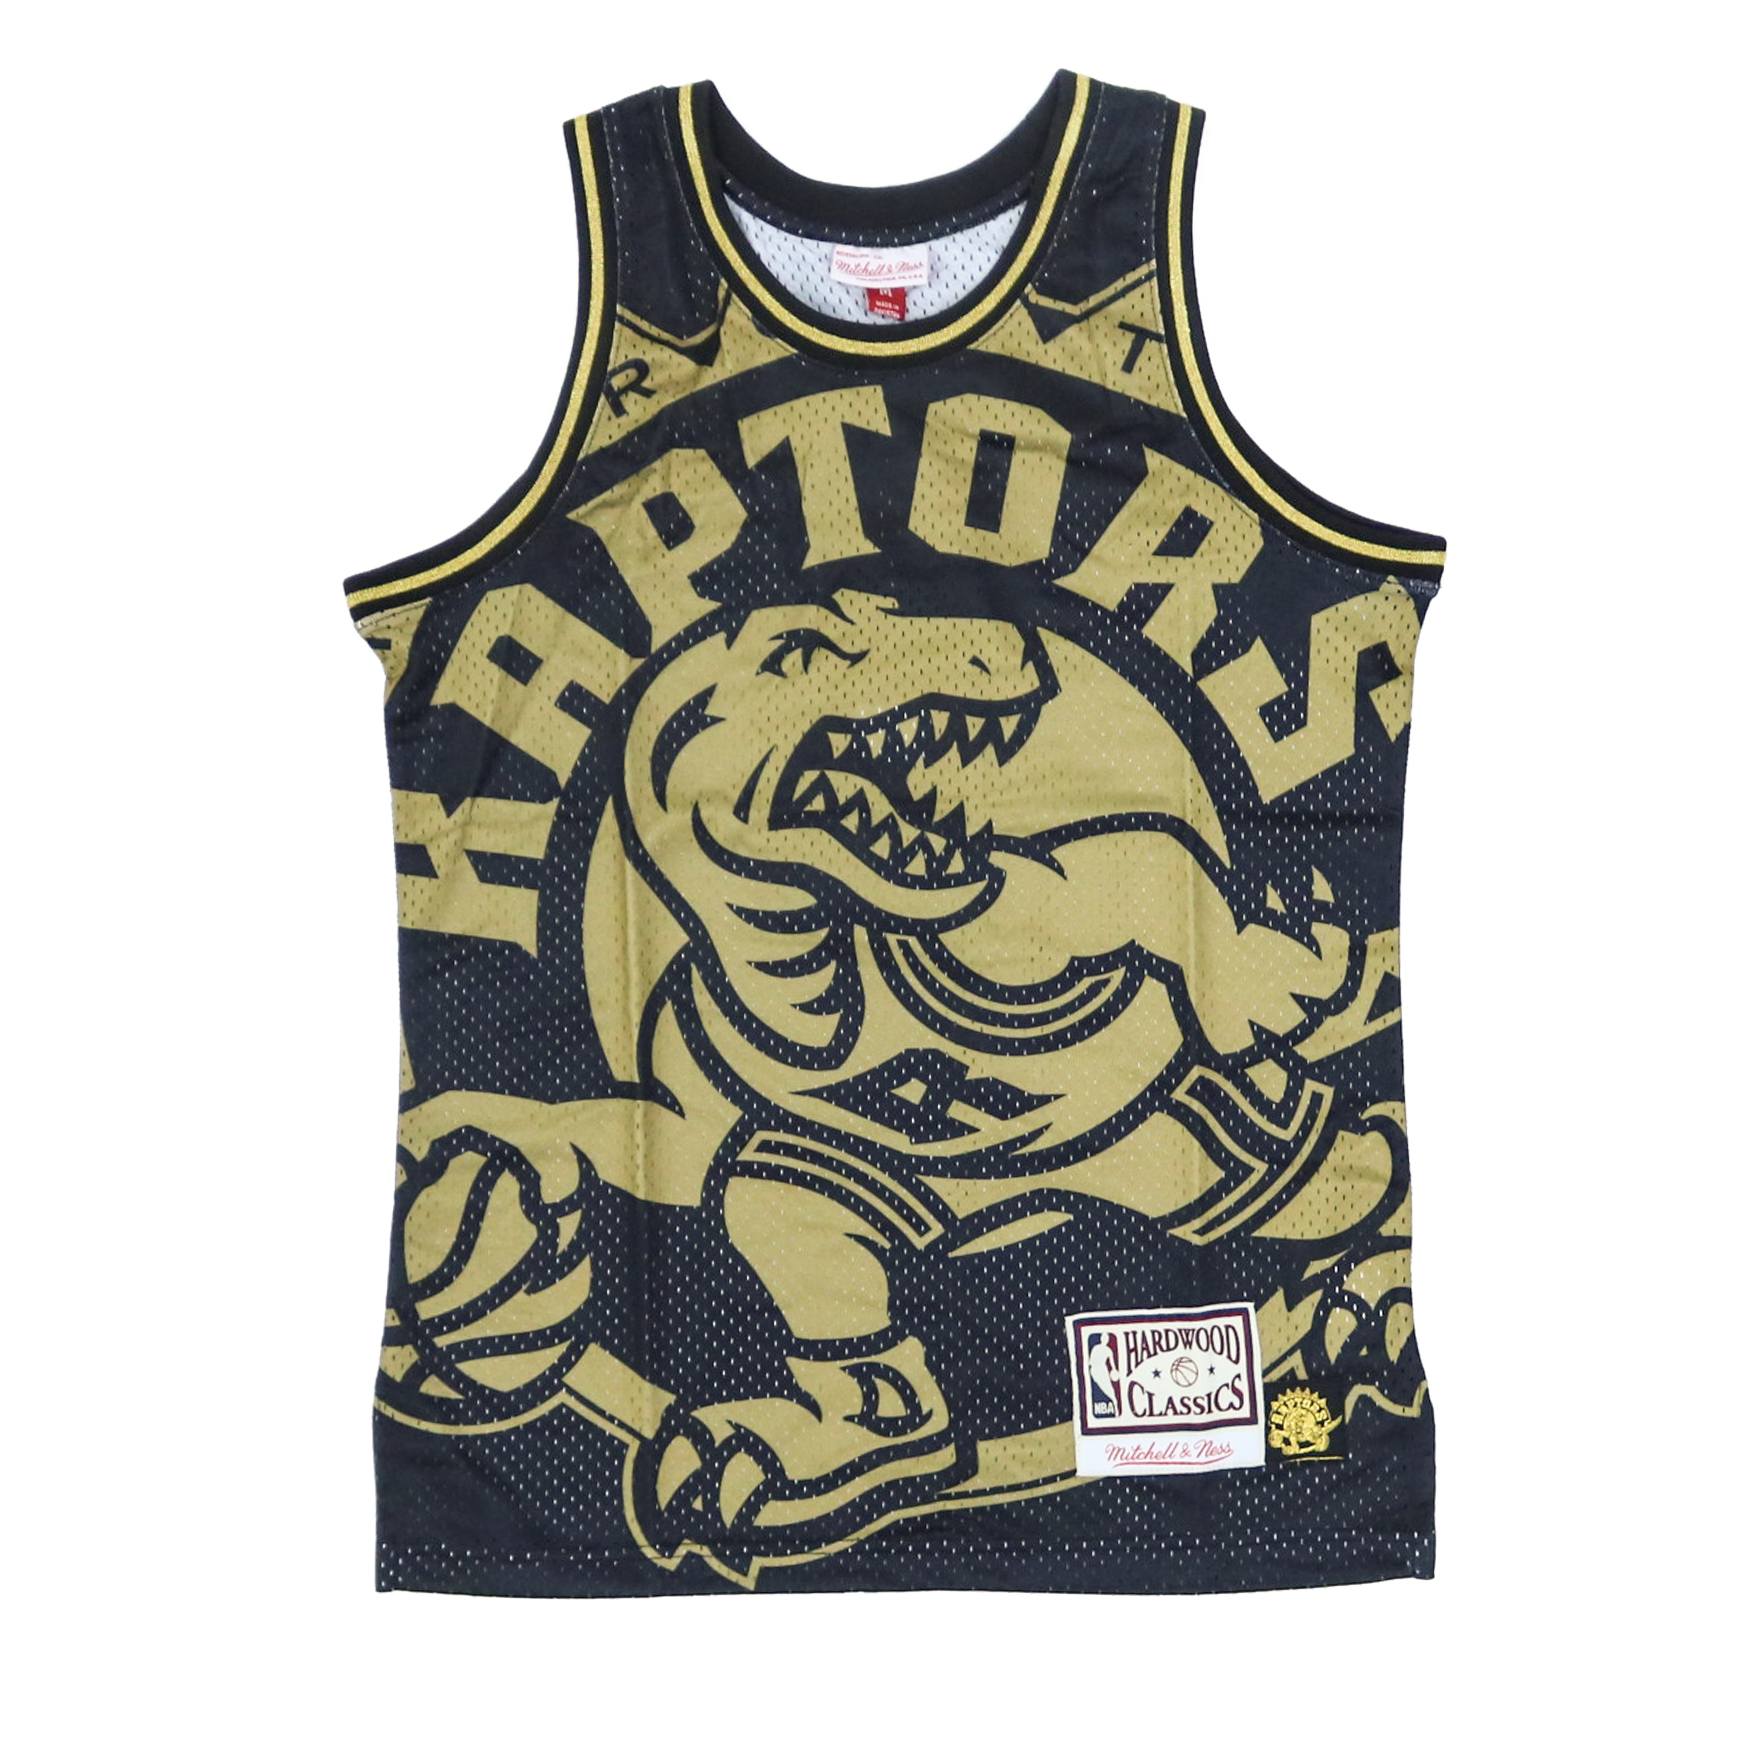 The Jersey of Toronto Raptors manufactured by Mitchell and Ness